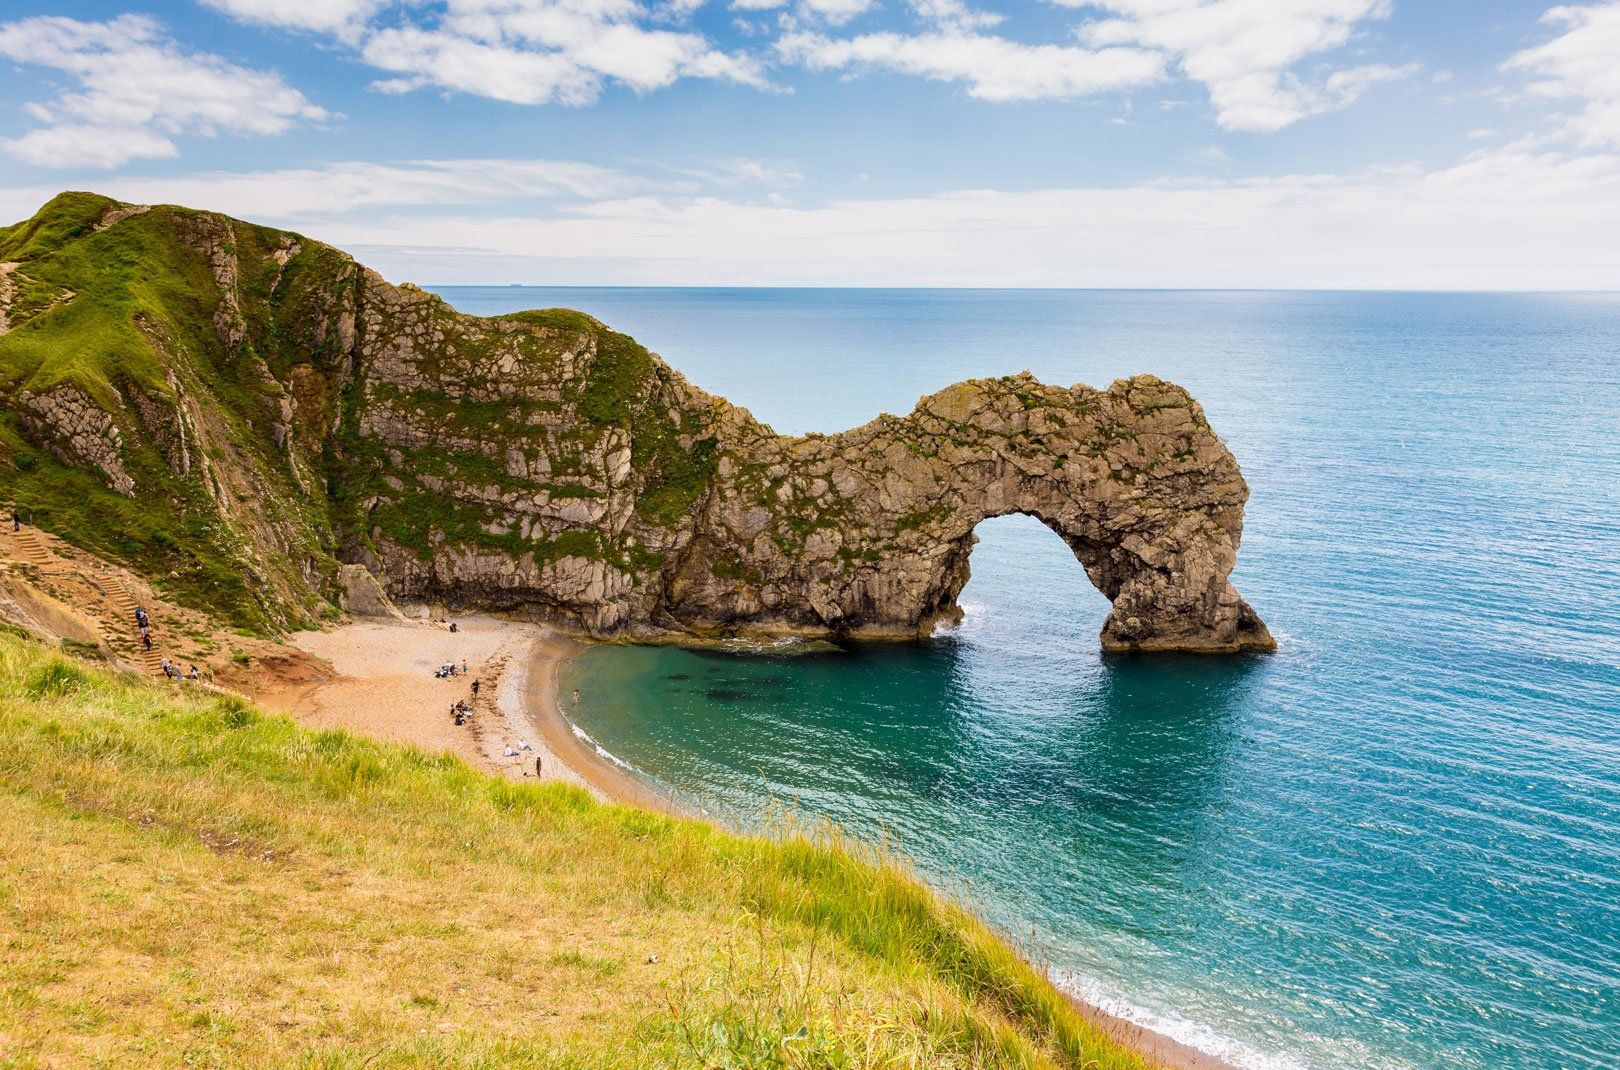 Scenic view of Durdle Door, an iconic rock arch on a sandy beach along the Jurassic Coast in Dorset, England